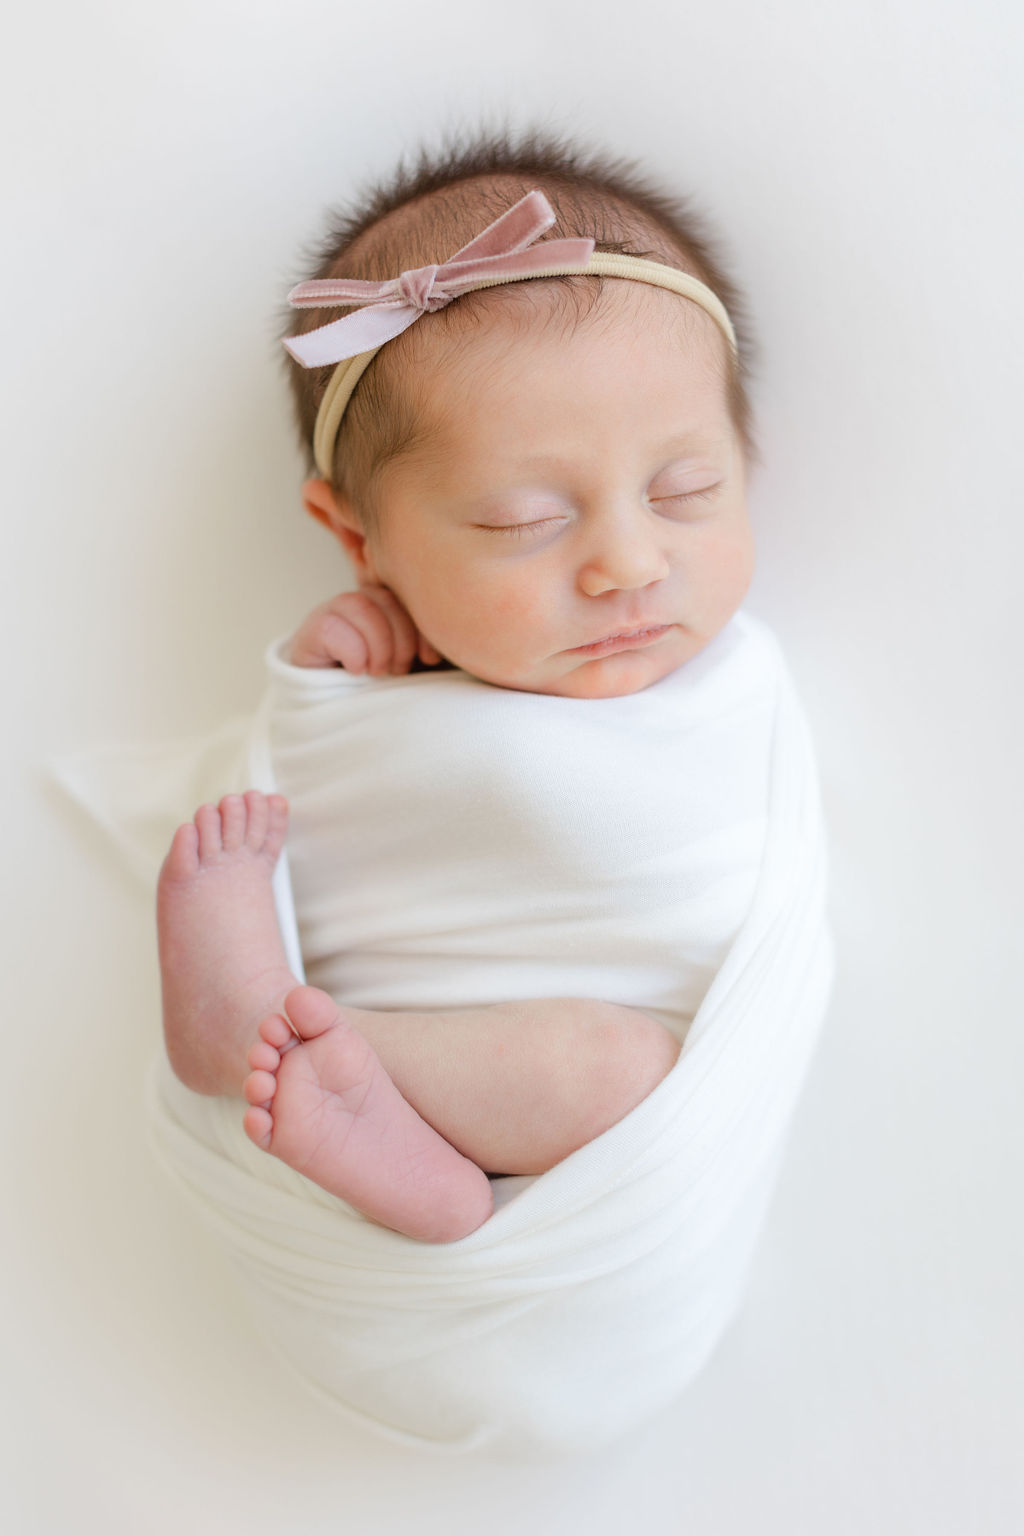 A newborn baby girl sleeps with a pink bow in a swaddle with legs sticking out